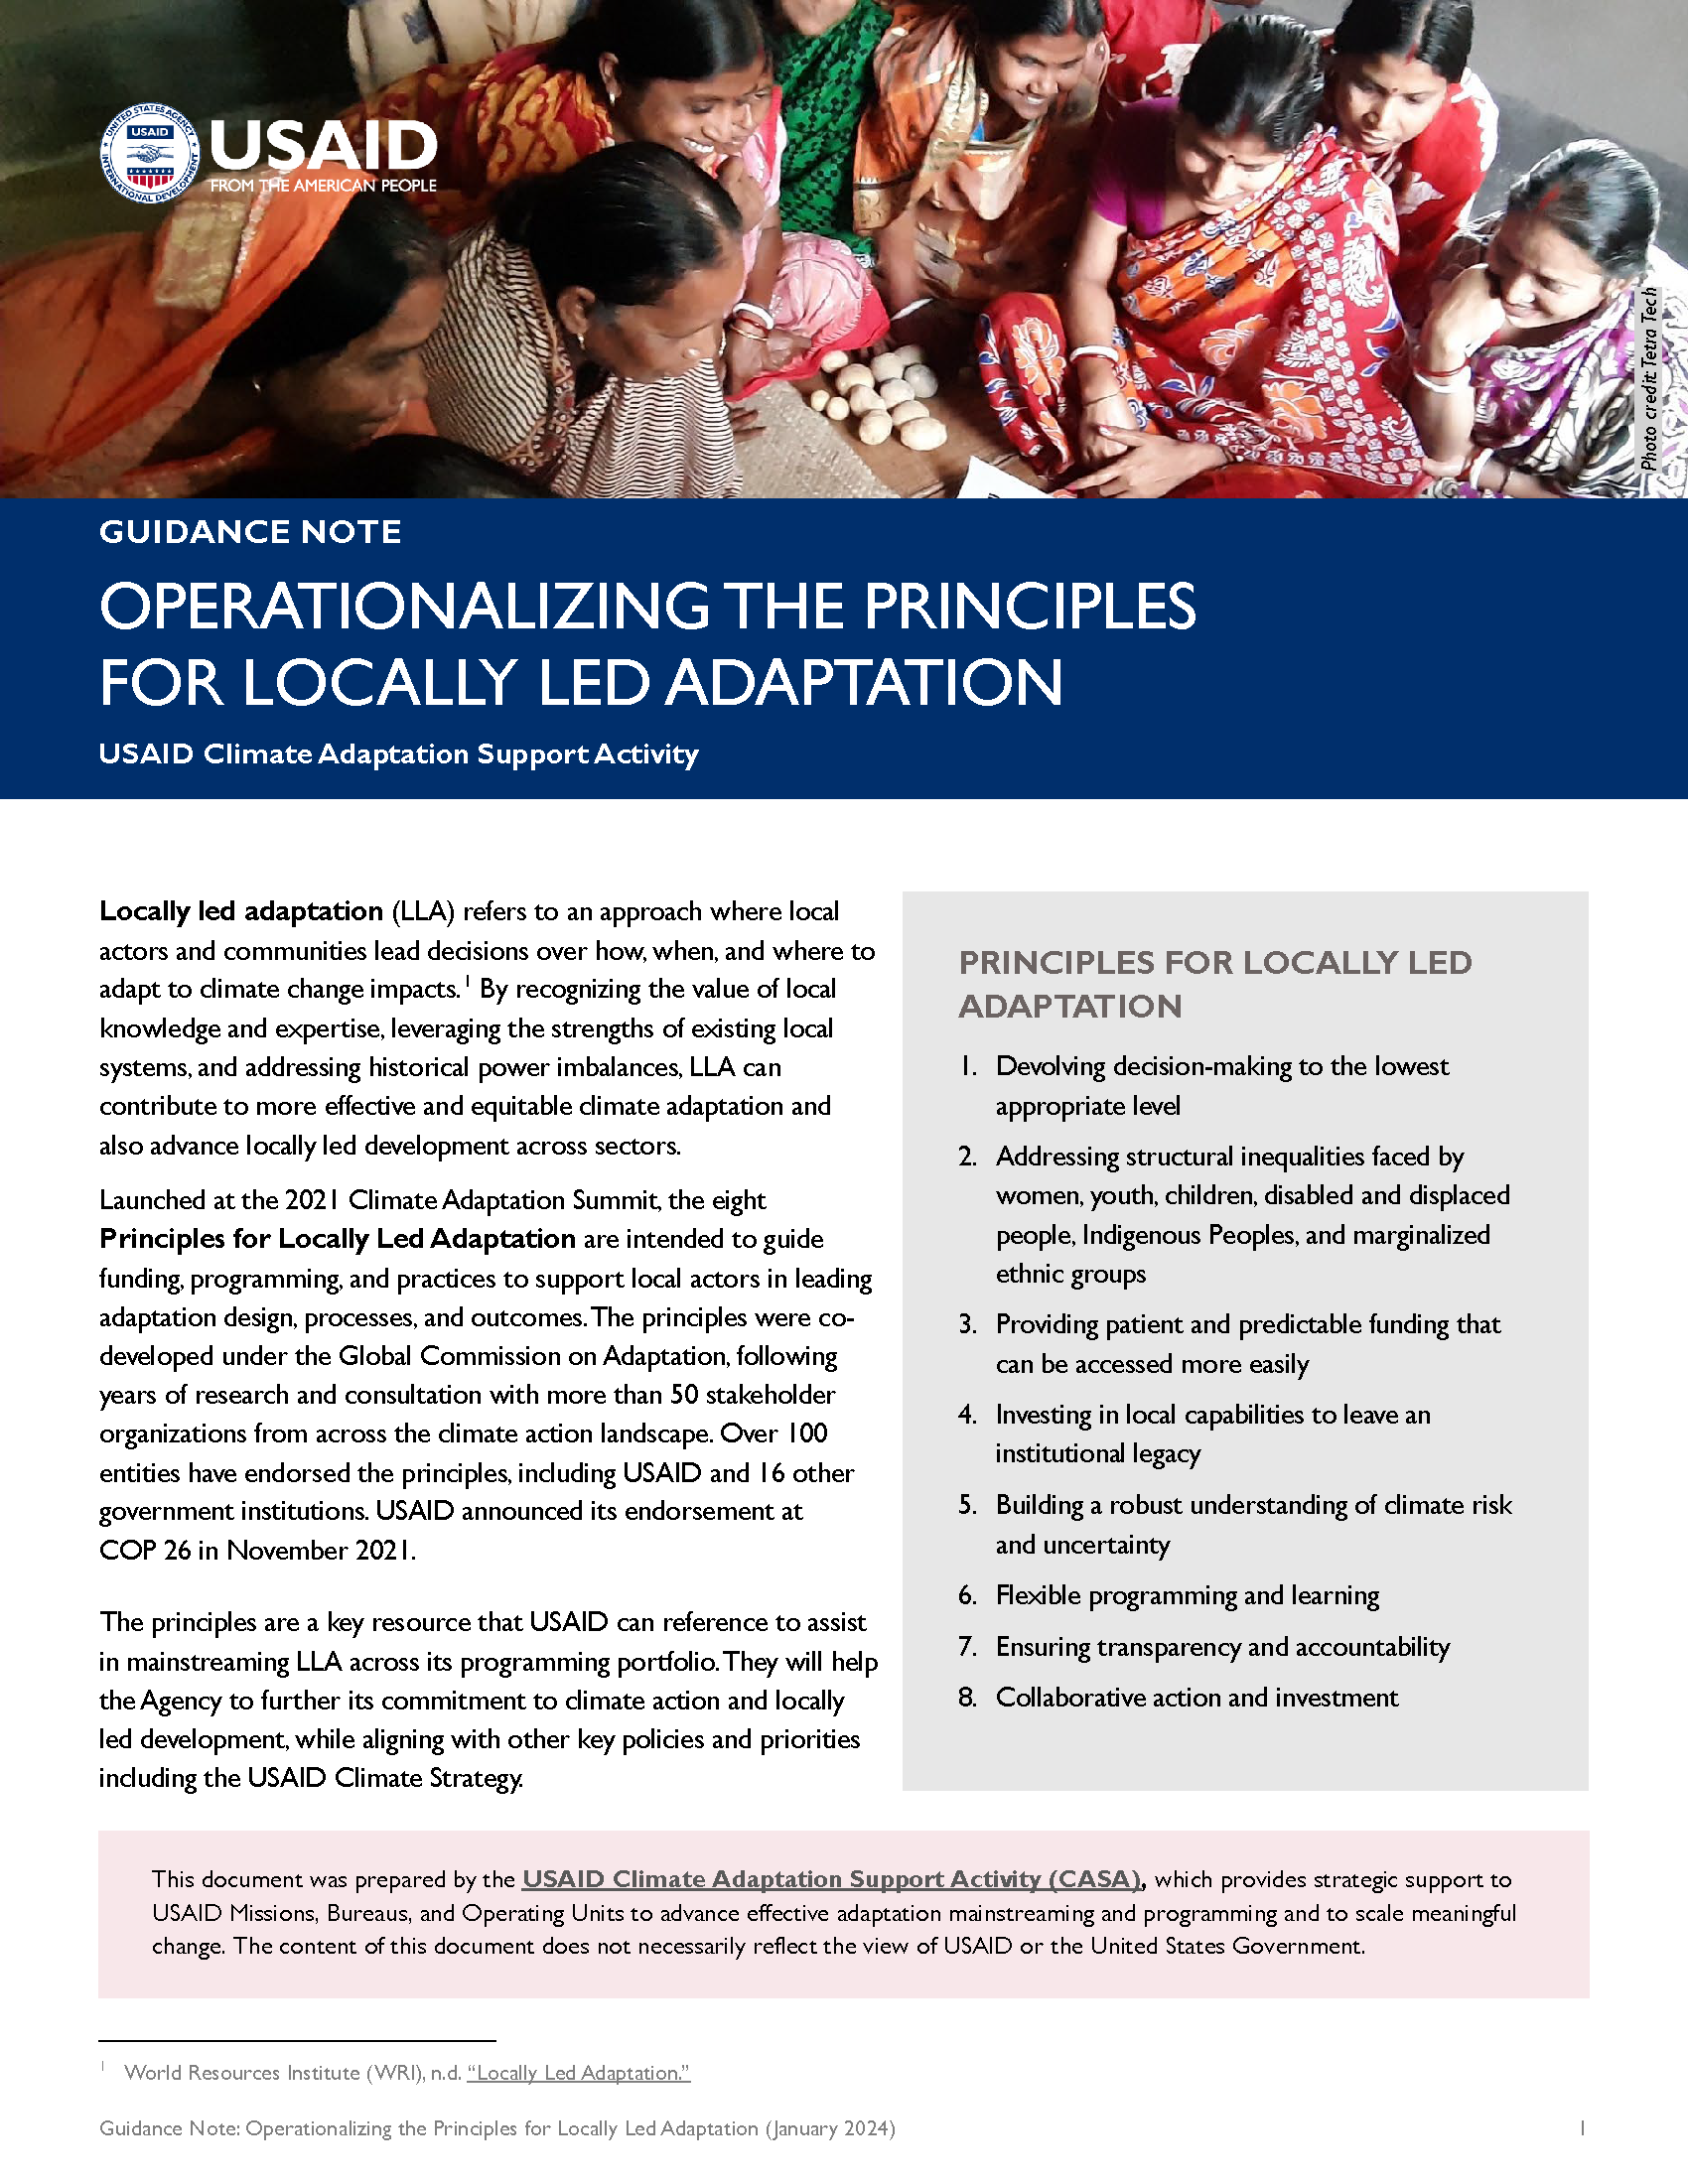 Cover page for Operationalizing the Principles for Locally Led Adaptation